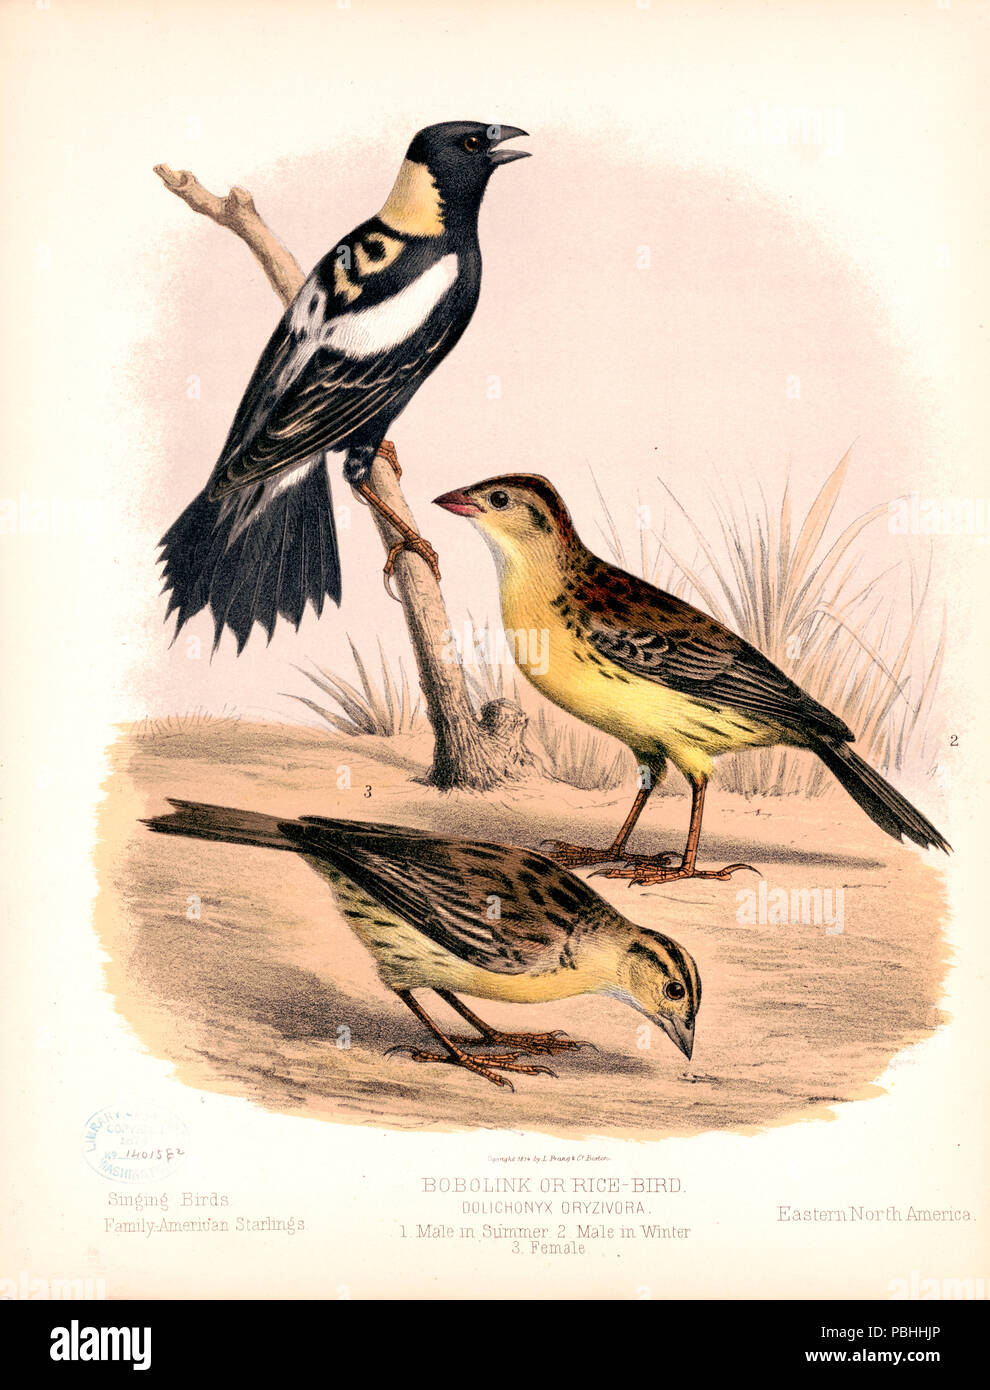 Print shows 1. a Bobolink or Rice-Bird in summer, facing right, upper left; 2. a male Bobolink in winter, left profile, middle right, and 3. a female Bobolink in winter lower right.  CA 1874 Stock Photo